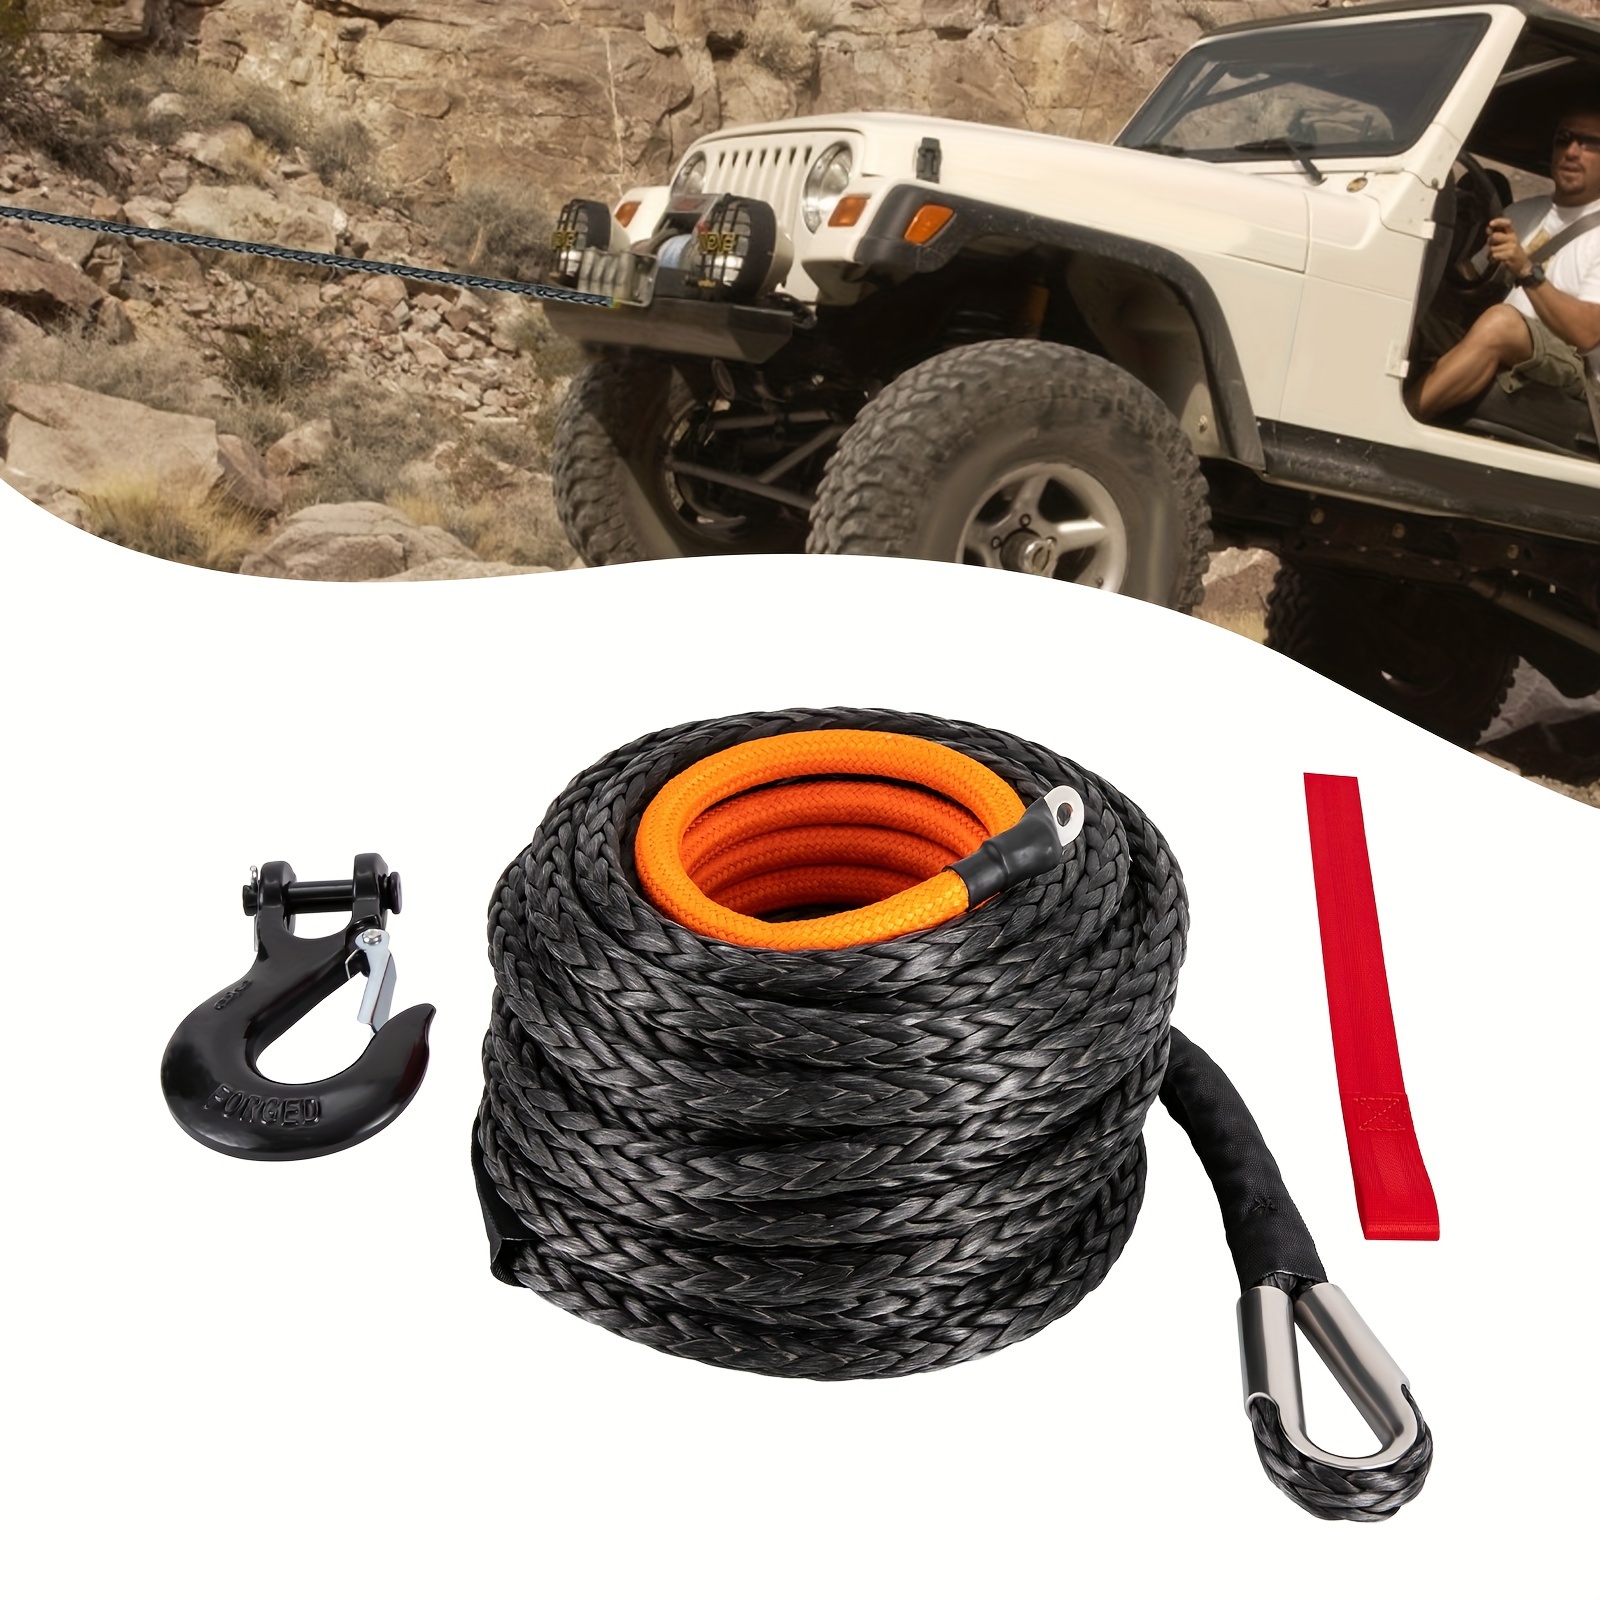 

9/16"x76' Synthetic Winch Rope With Hook Protective Sleeve Car Tow Recovery Cable For 4wd Off-road Vehicle Truck Atv Utv Suv 35000 Lbs Breaking Strength (orange)